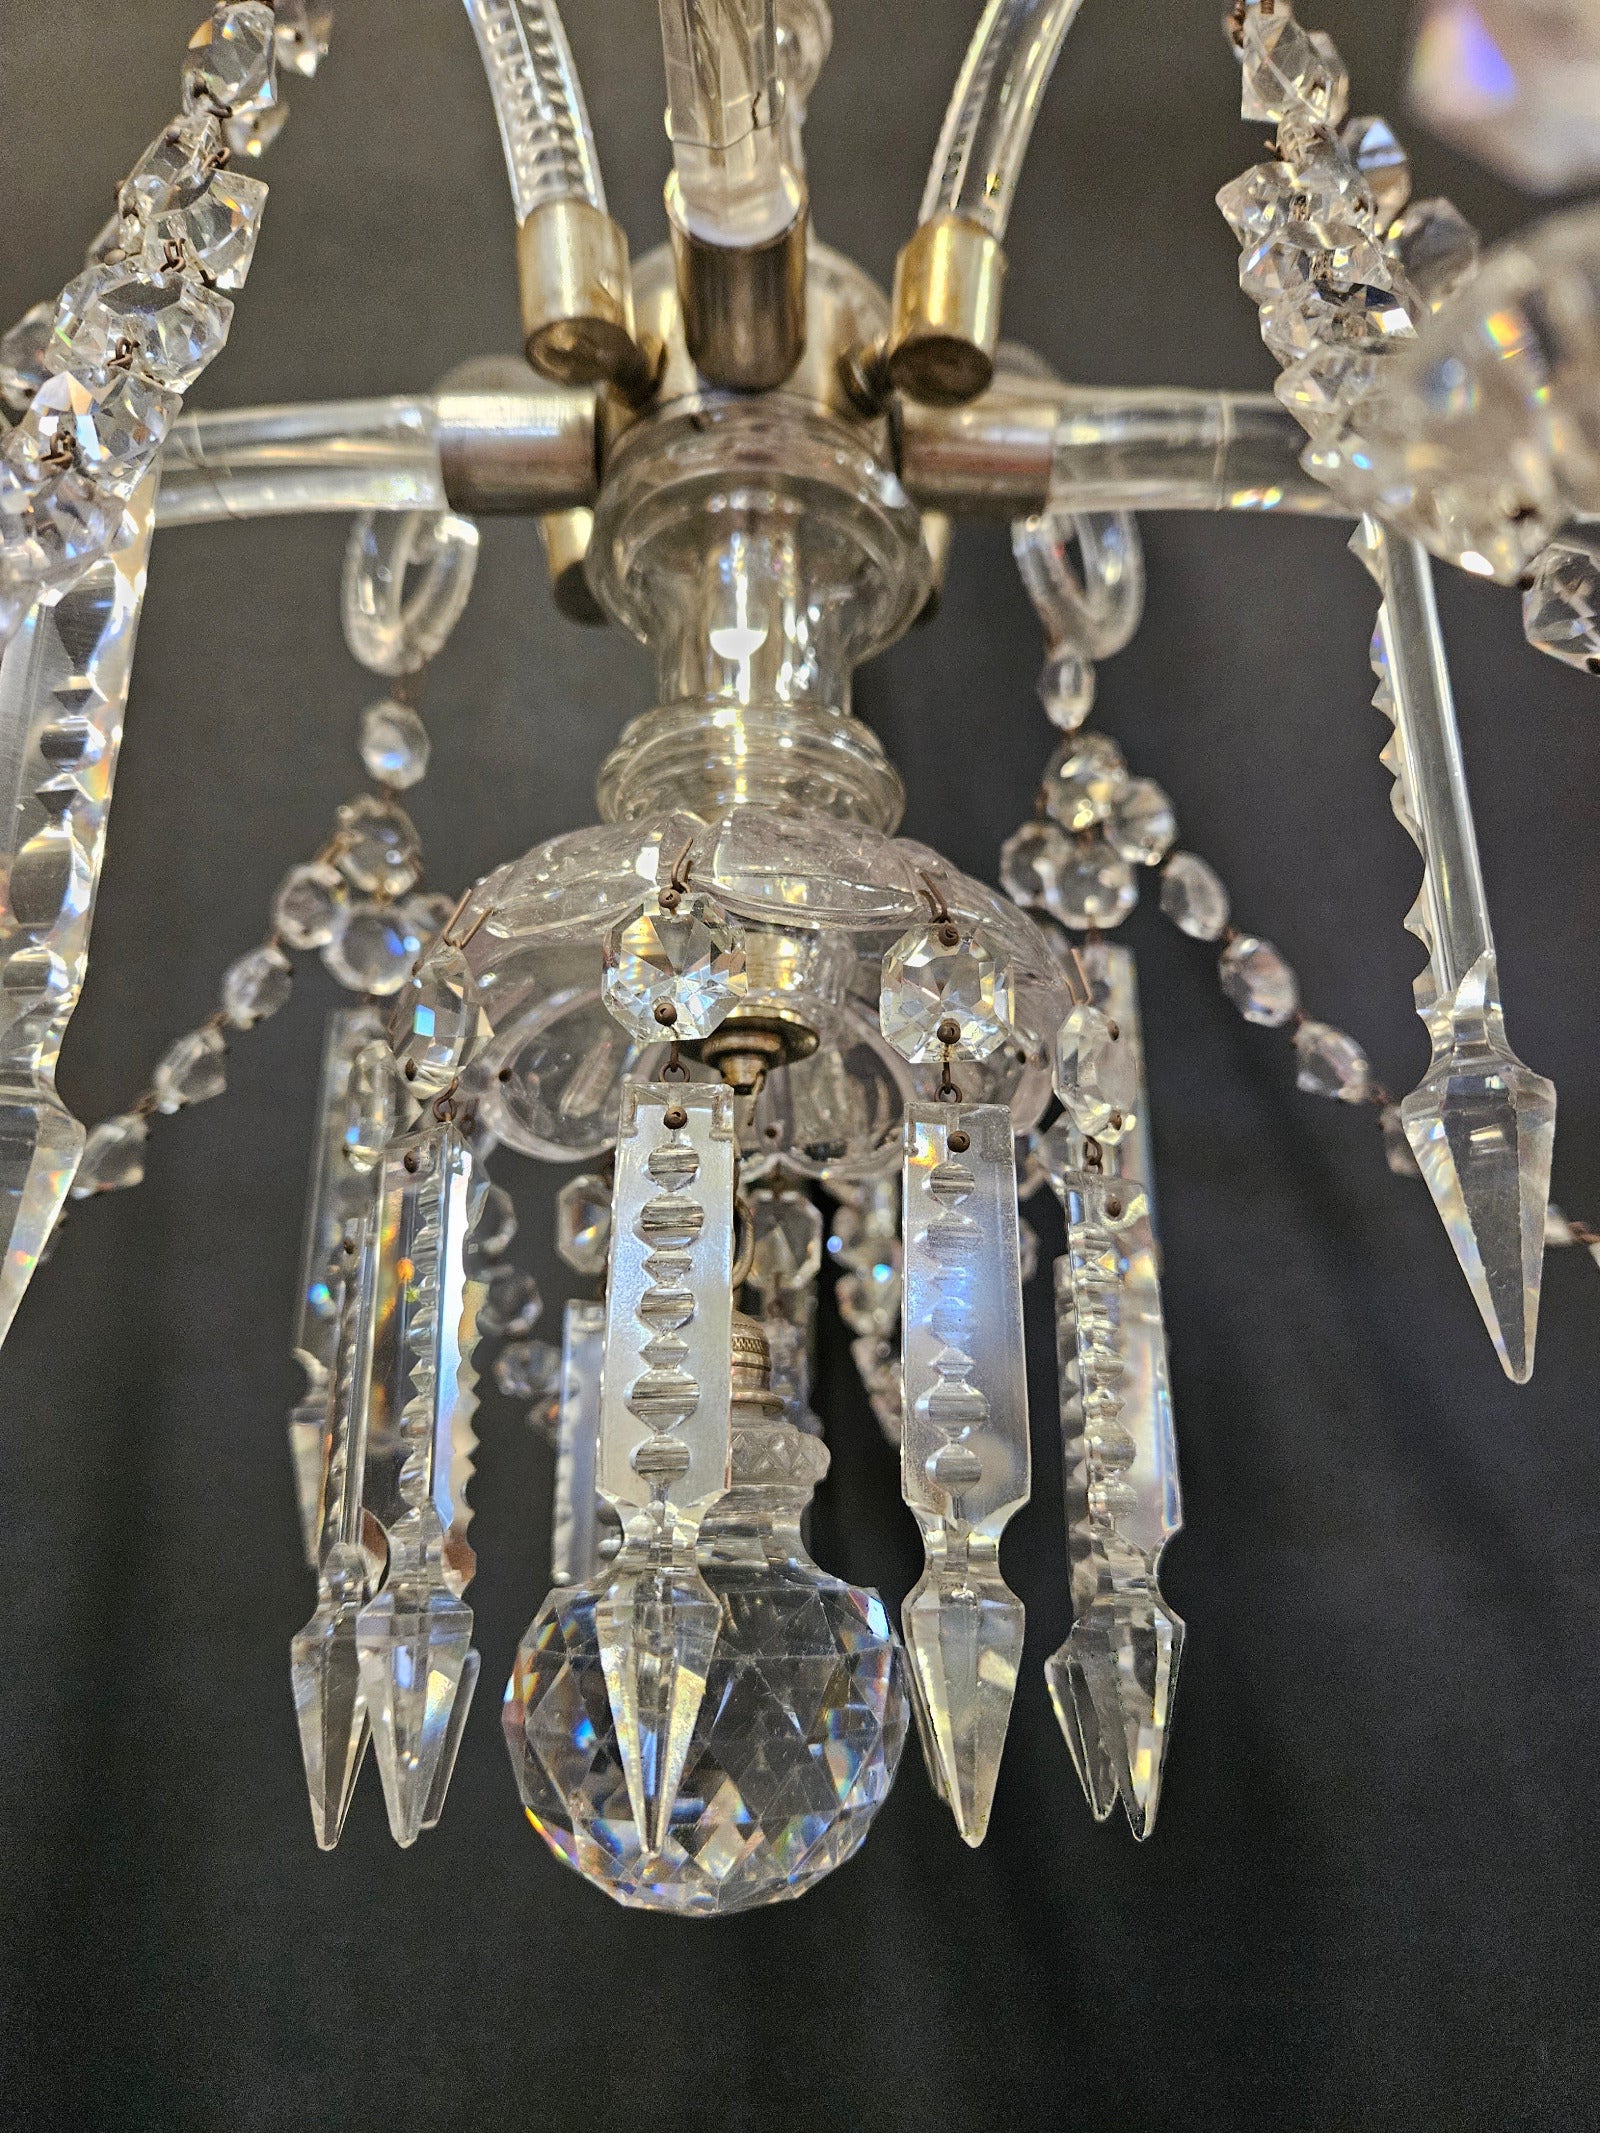 view of bottom of chandelier